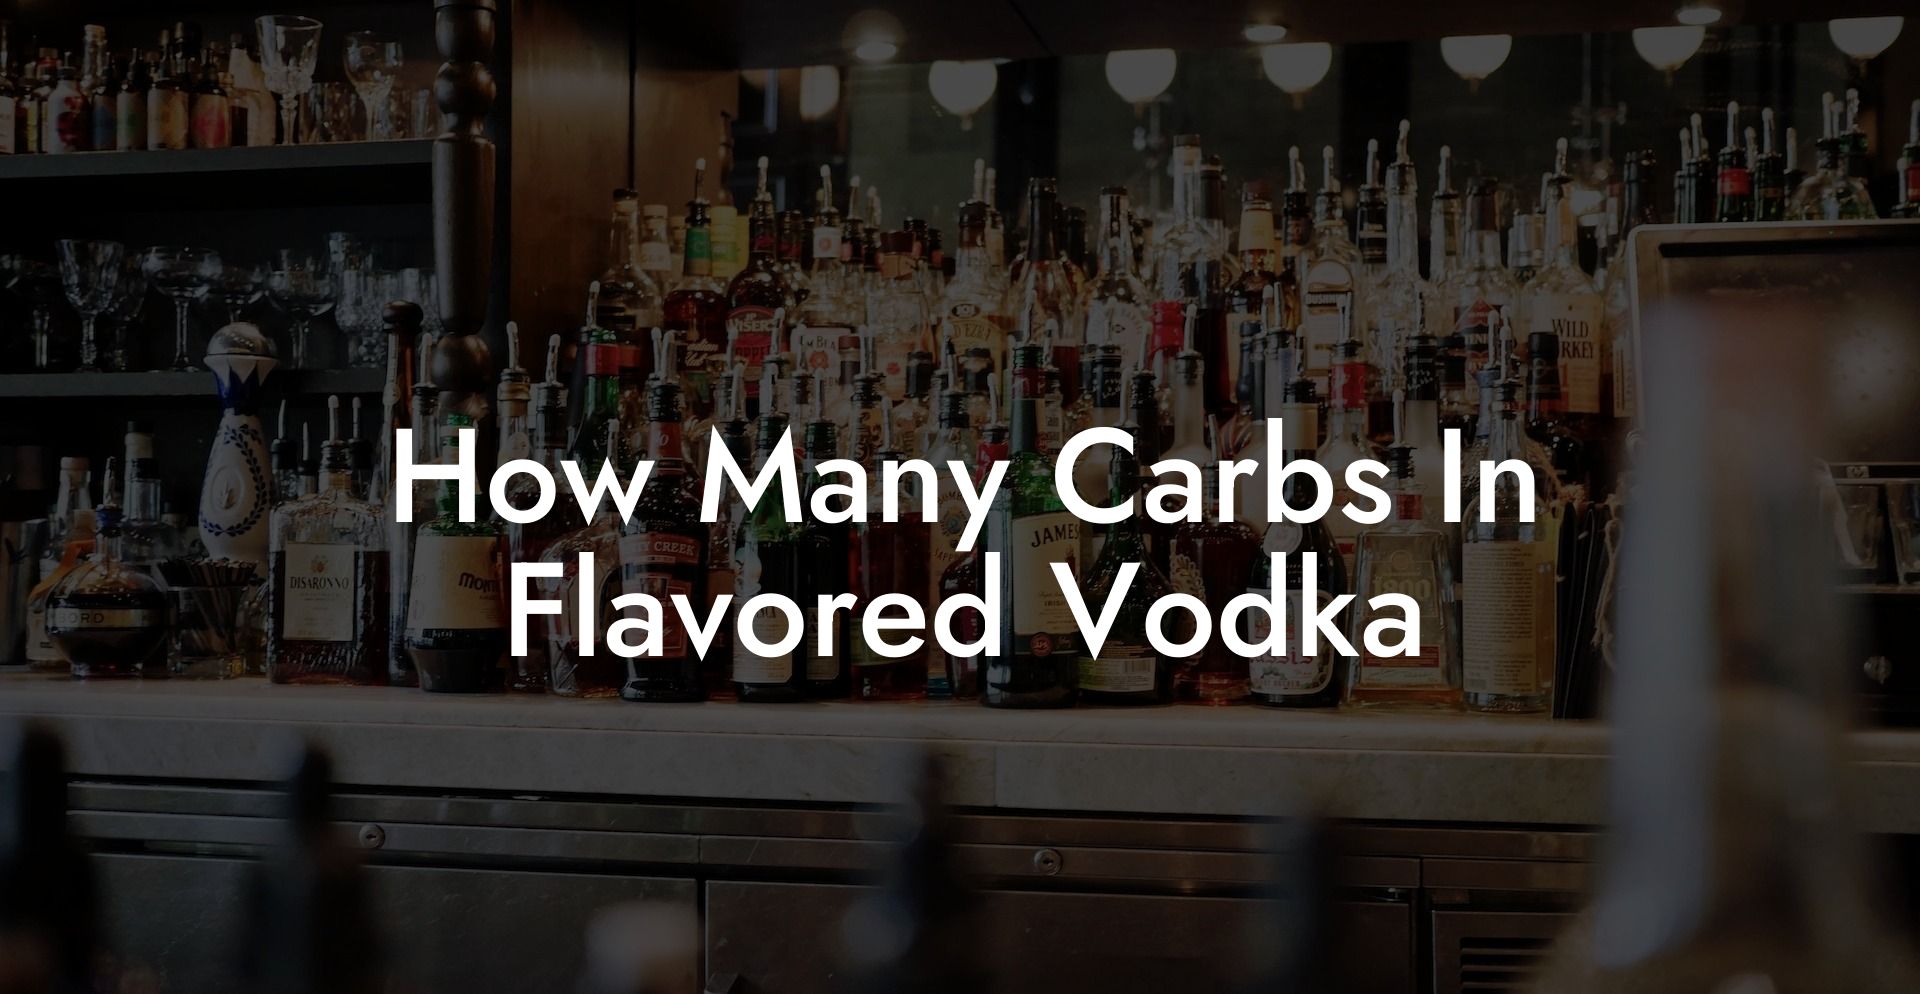 How Many Carbs In Flavored Vodka